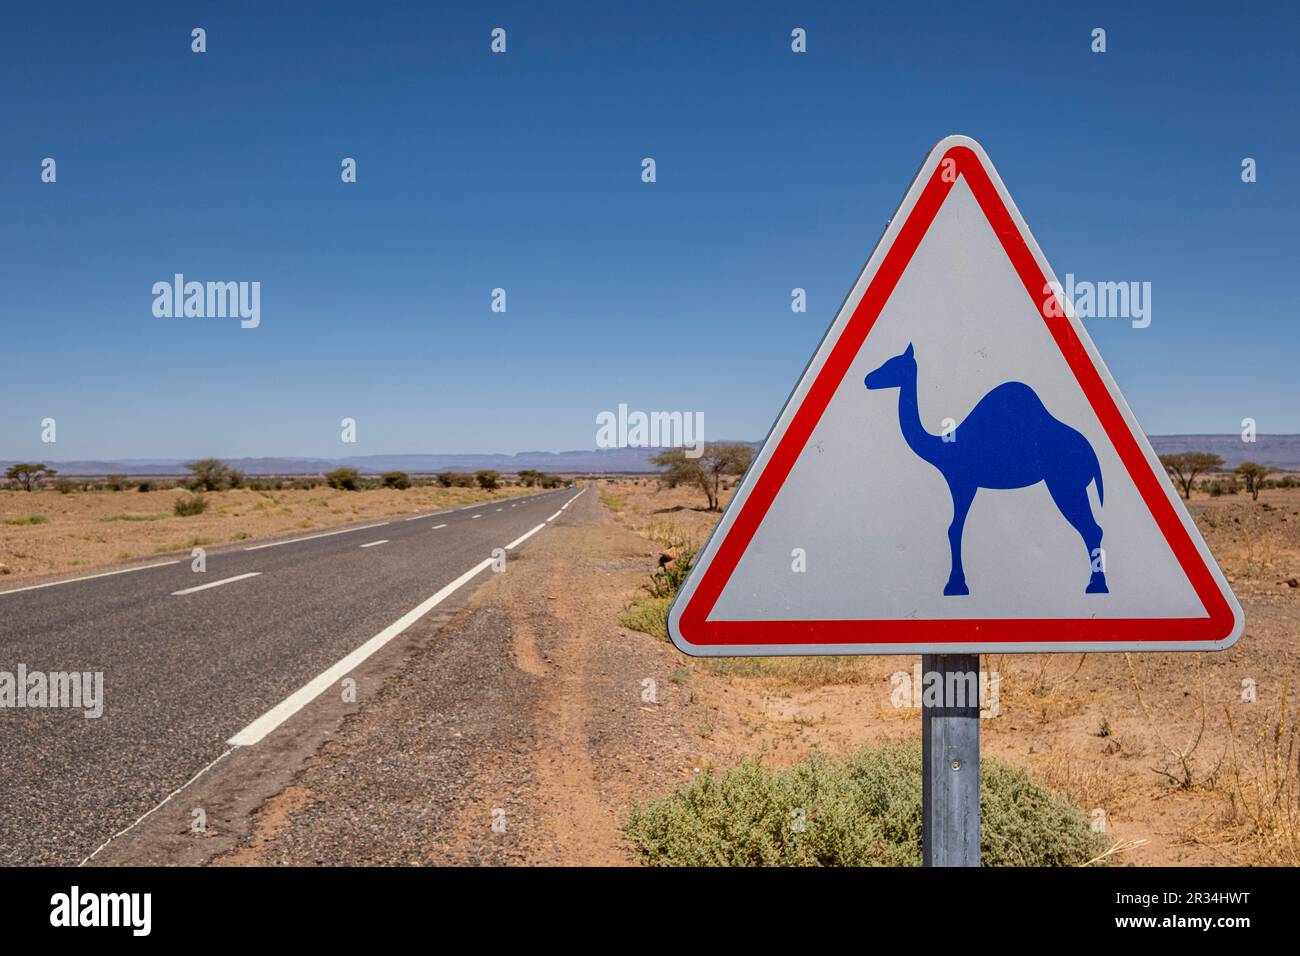 Notice of camels at large, M'Hamid road, Zagora region,Morocco, Africa. Stock Photo